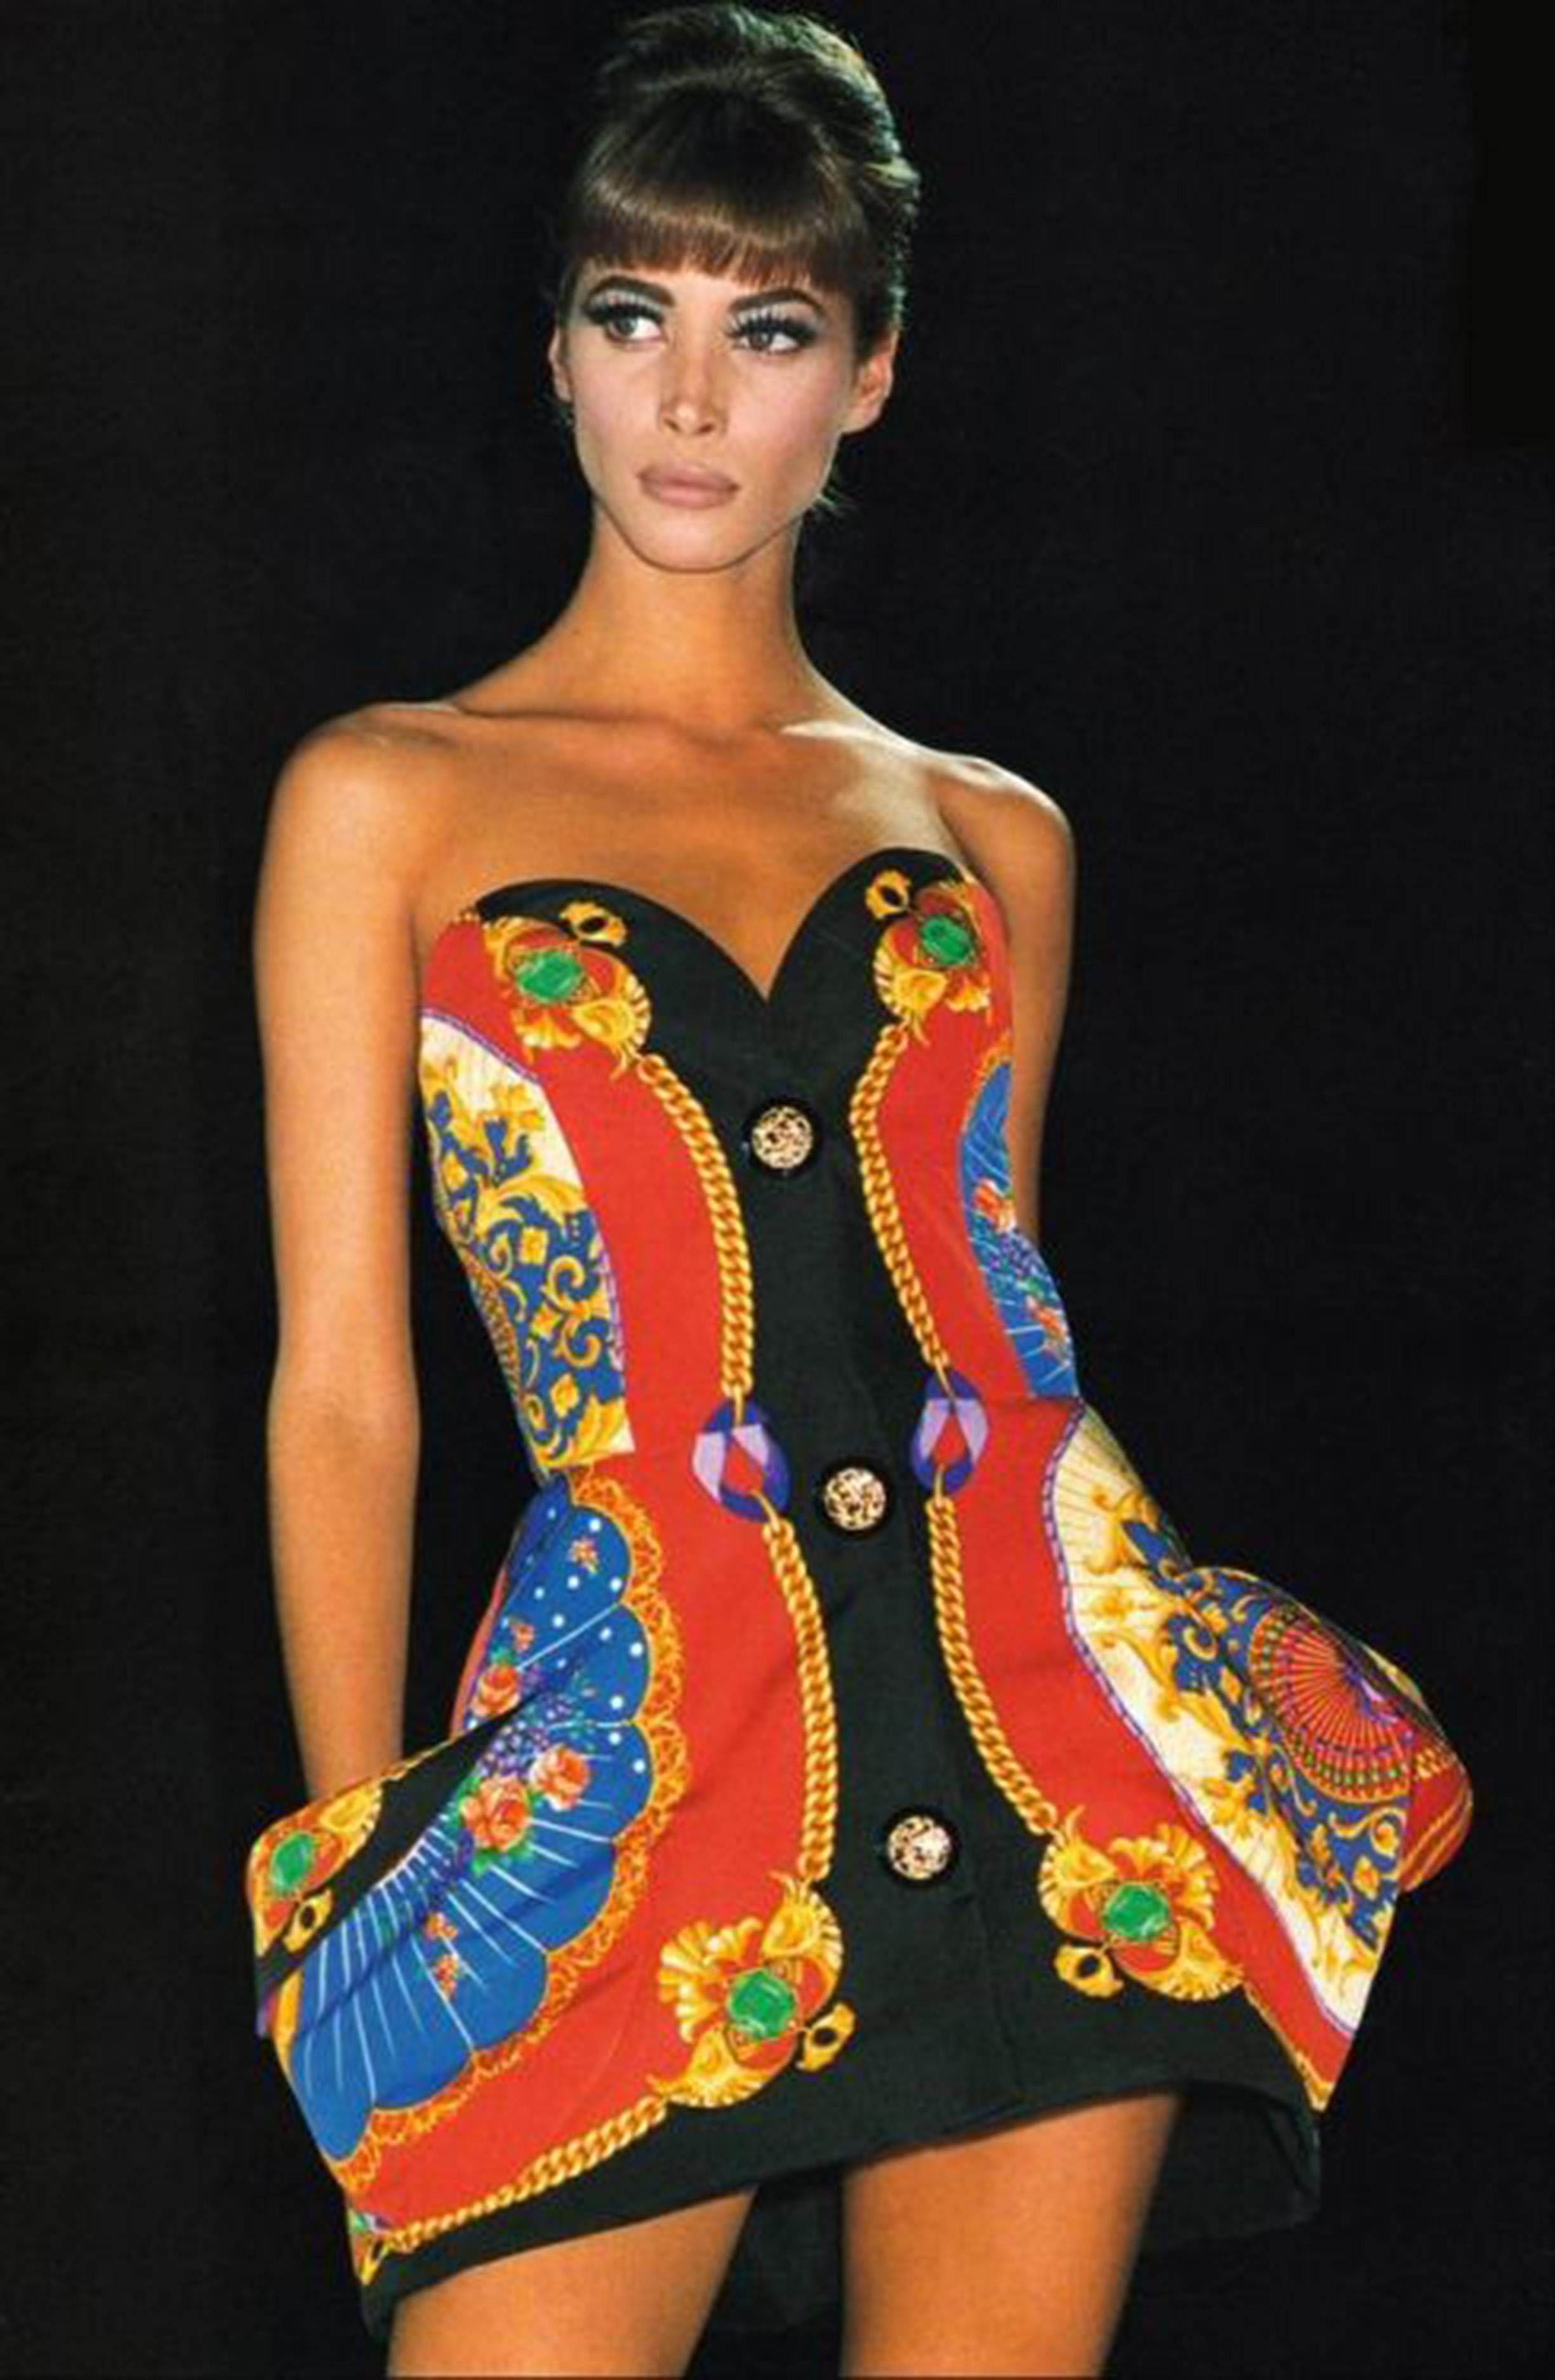 A well documented and highly coveted Gianni Versace 'I Ventagli'  print sculpted silk strapless mini dress dating back to his iconic 1991 spring-summer collection. Versace’s creations were enjoyed by the super wealthy but his impact was felt across